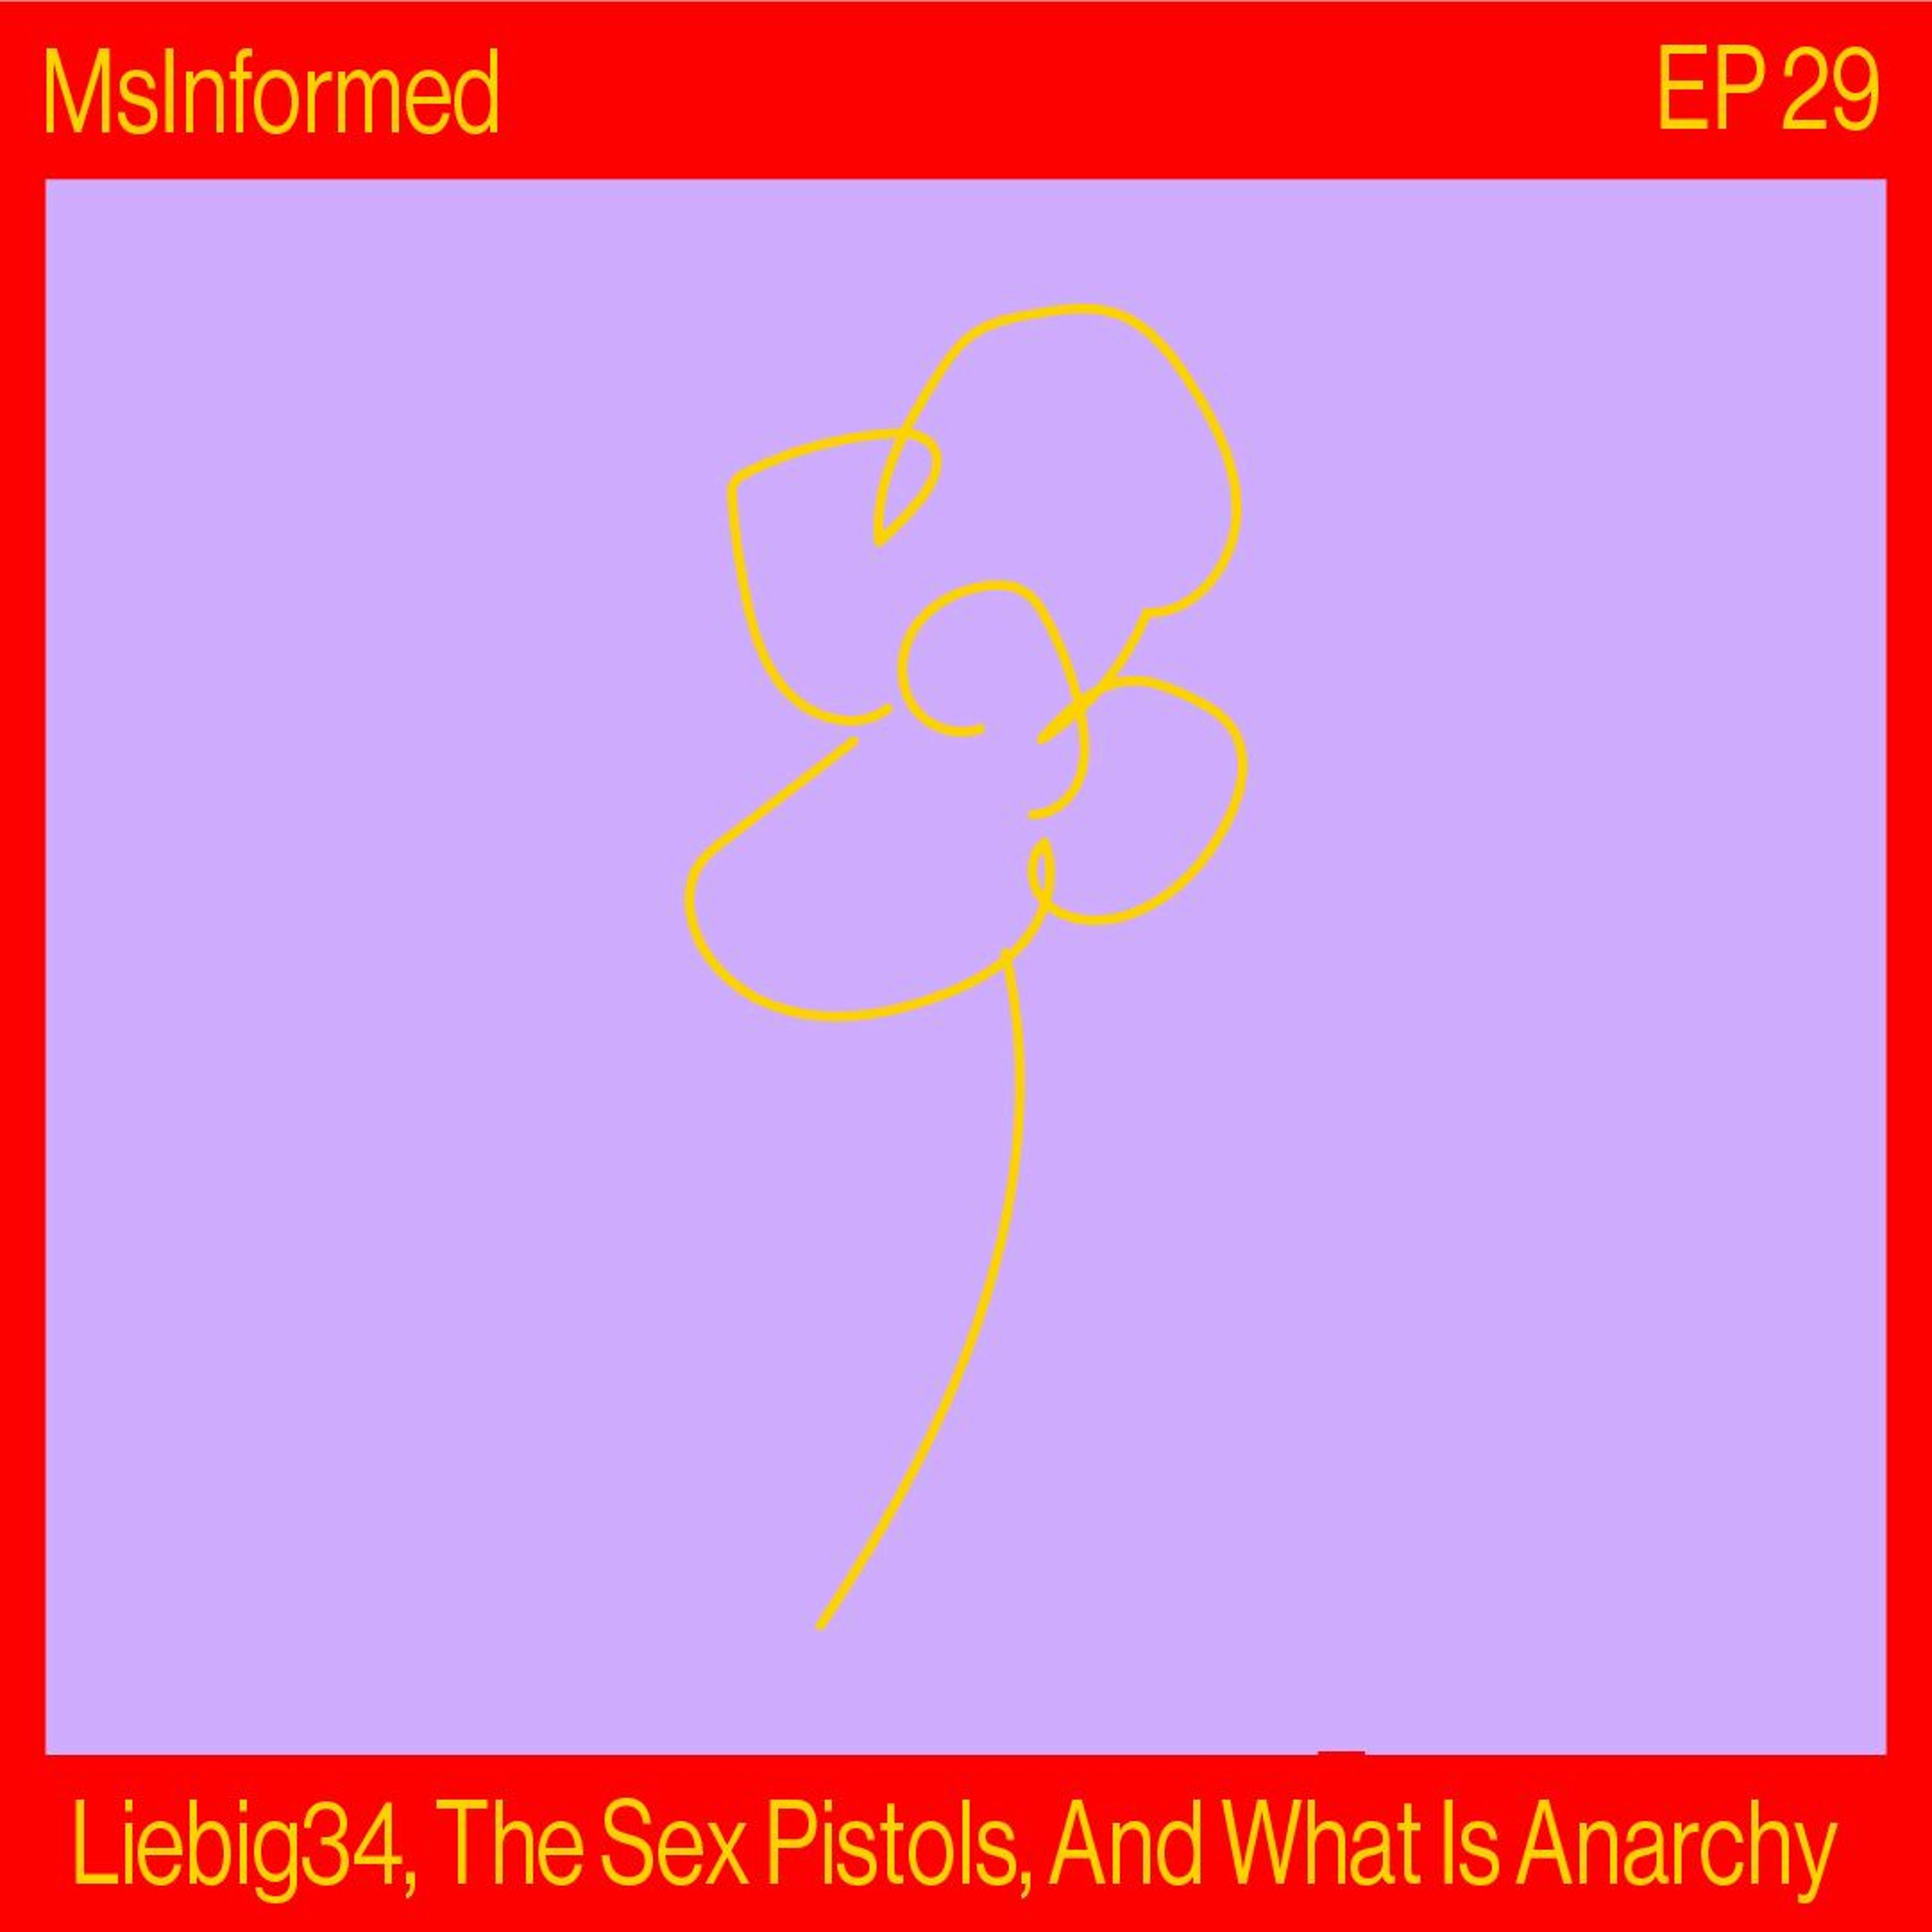 Episode 29: Liebig34, The Sex Pistols, And What Is Anarchy